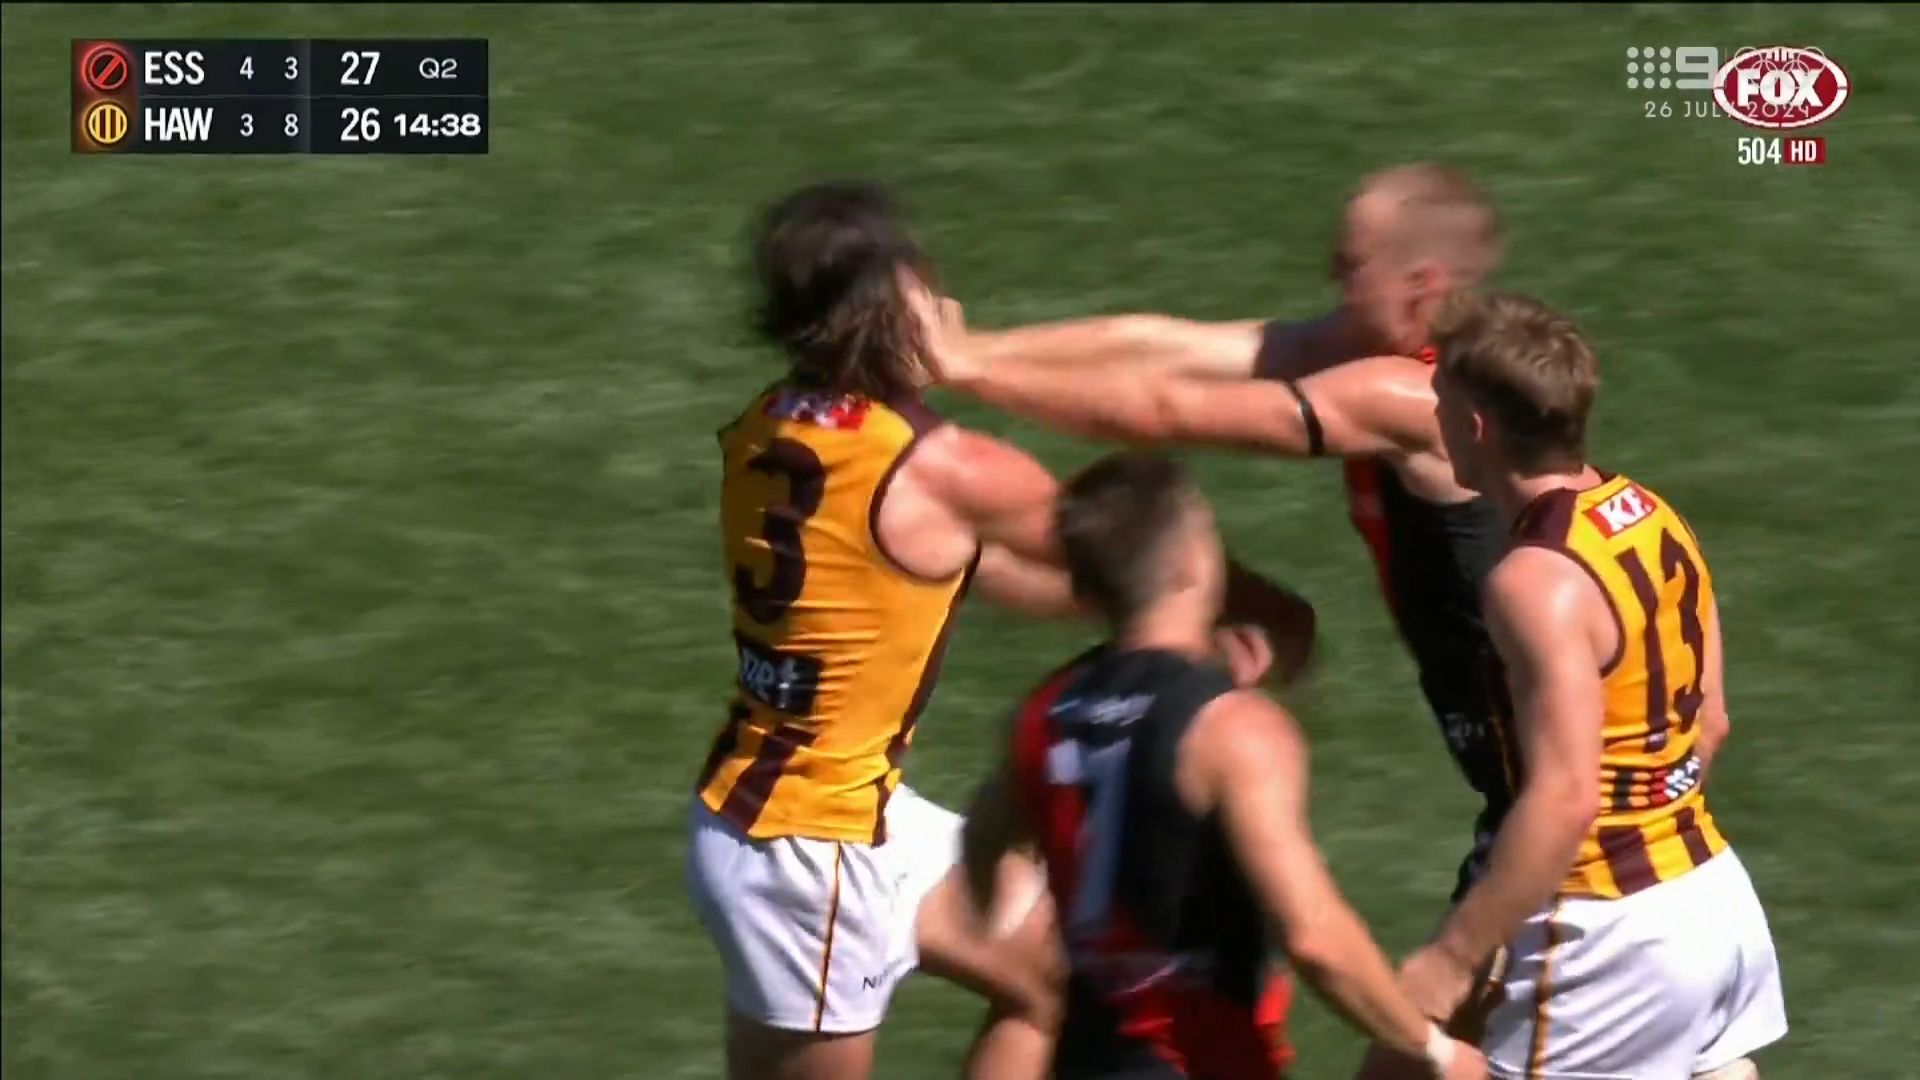 Hawthorn to challenge James Sicily's one-match ban after kicking incident against Essendon